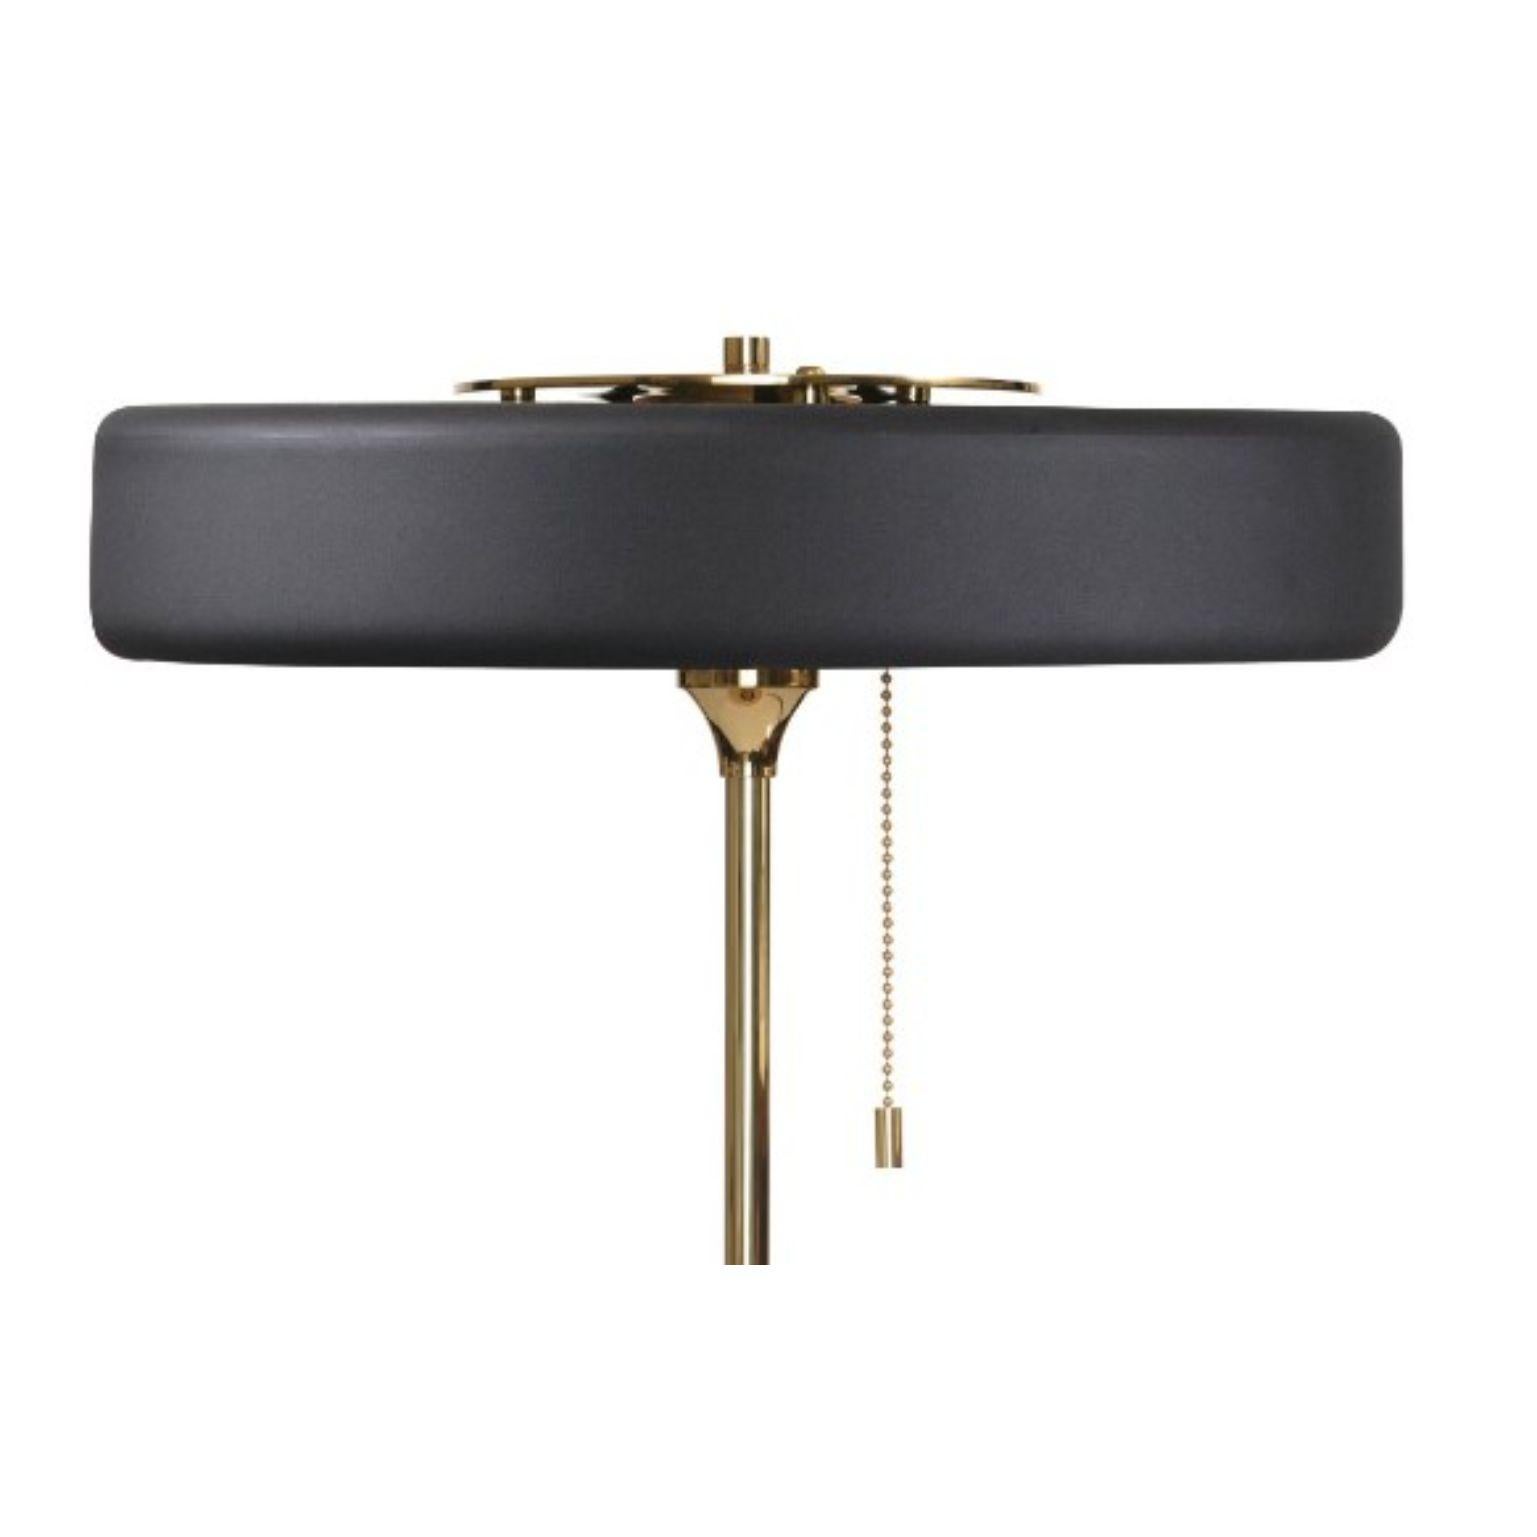 Revolve table lamp - Brushed brass - Black by Bert Frank
Dimensions: 42 x 35 x 15 cm
Materials: Brass, steel

Also available in polished brass

When Adam Yeats and Robbie Llewellyn founded Bert Frank in 2013 it was a meeting of minds and the start